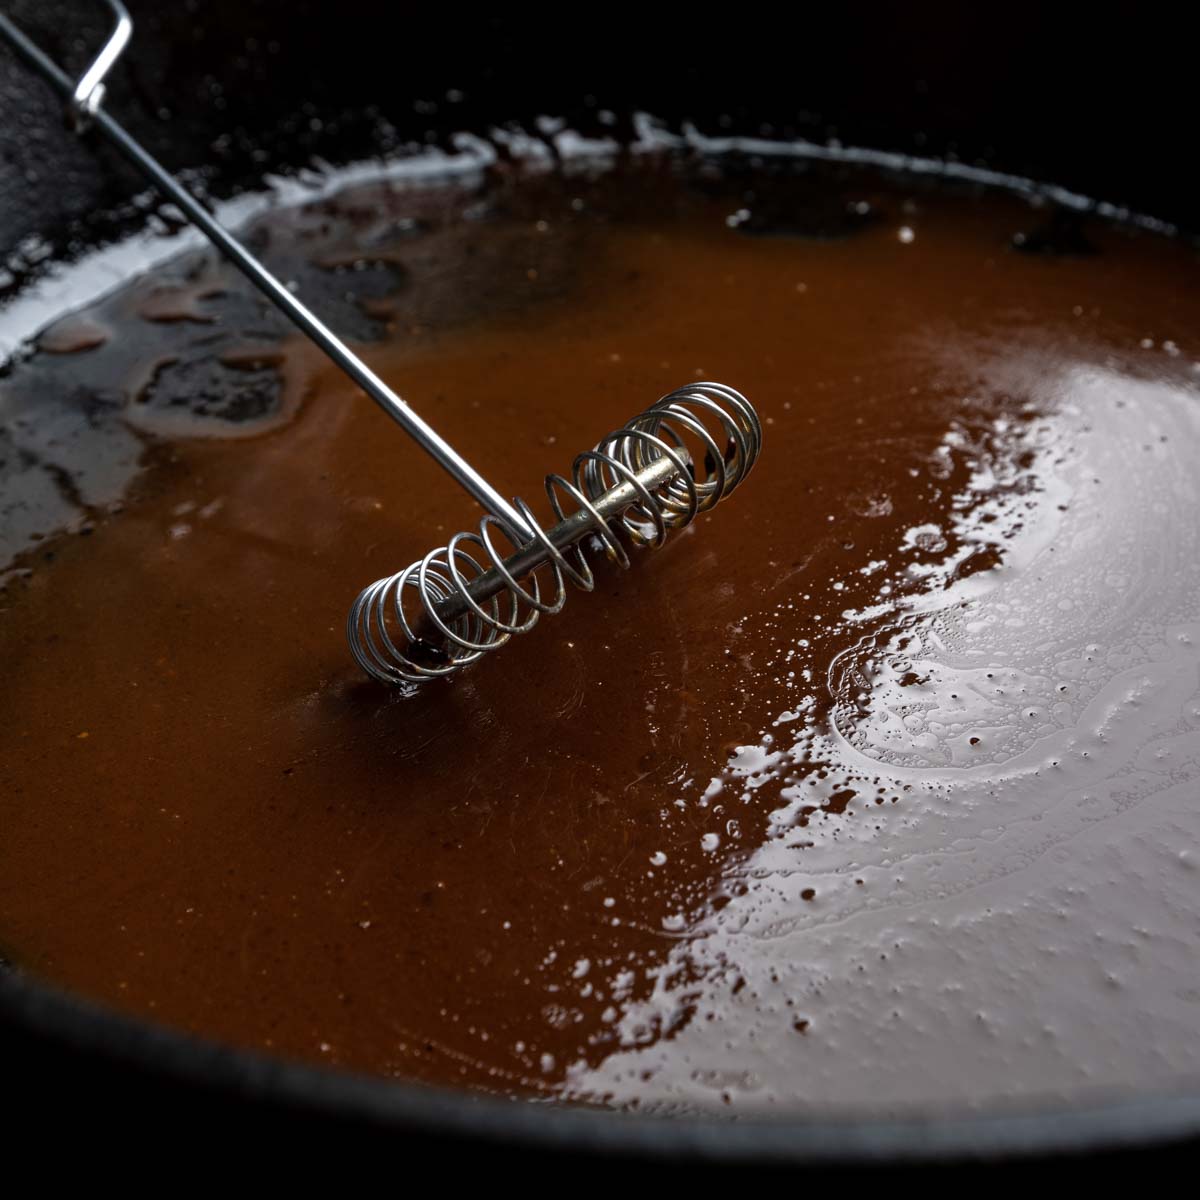 White wine pan sauce being whisked in the pan